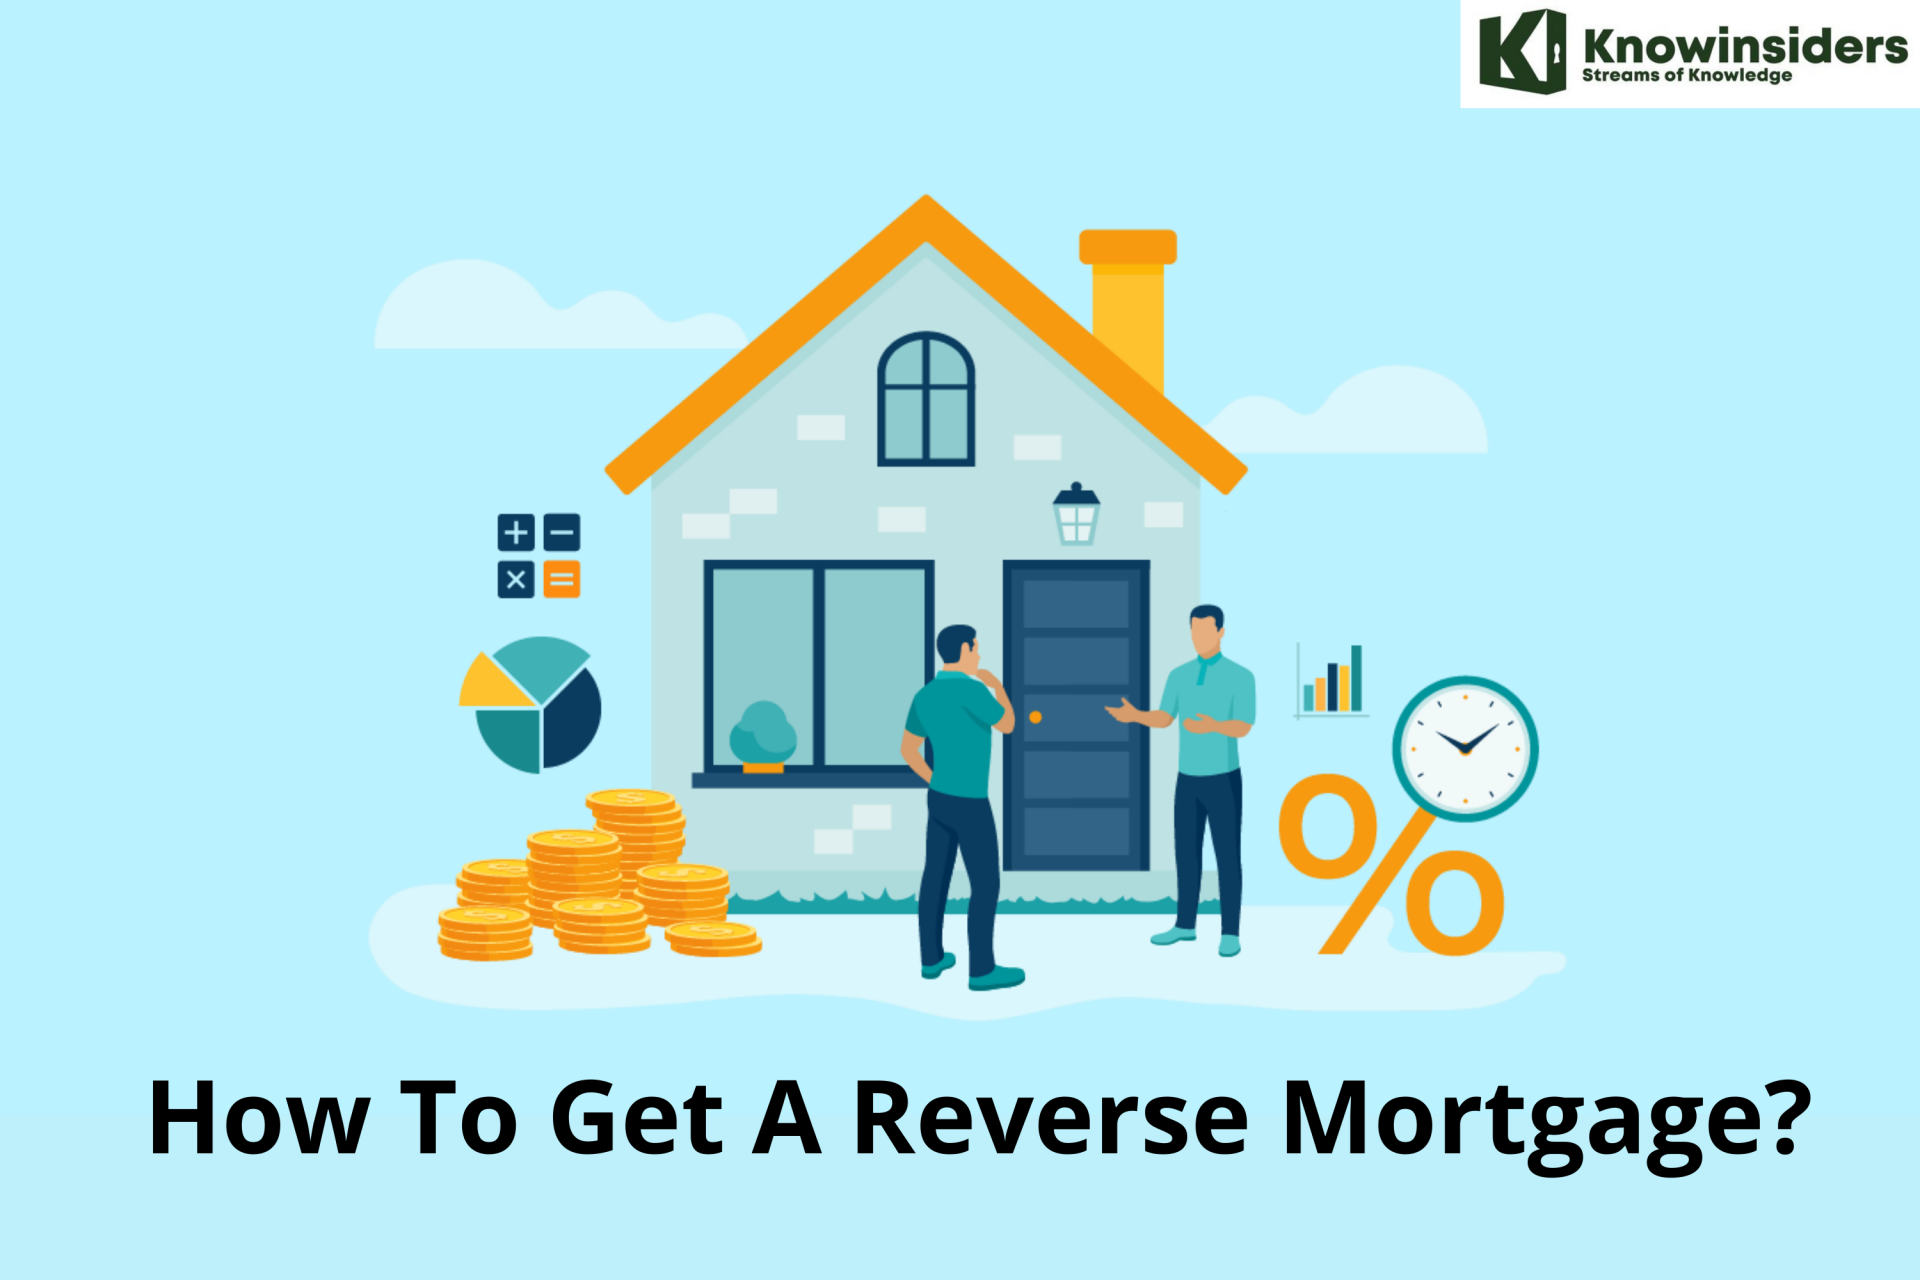 How To Get A Reverse Mortgage and How Much Can I Borrow?